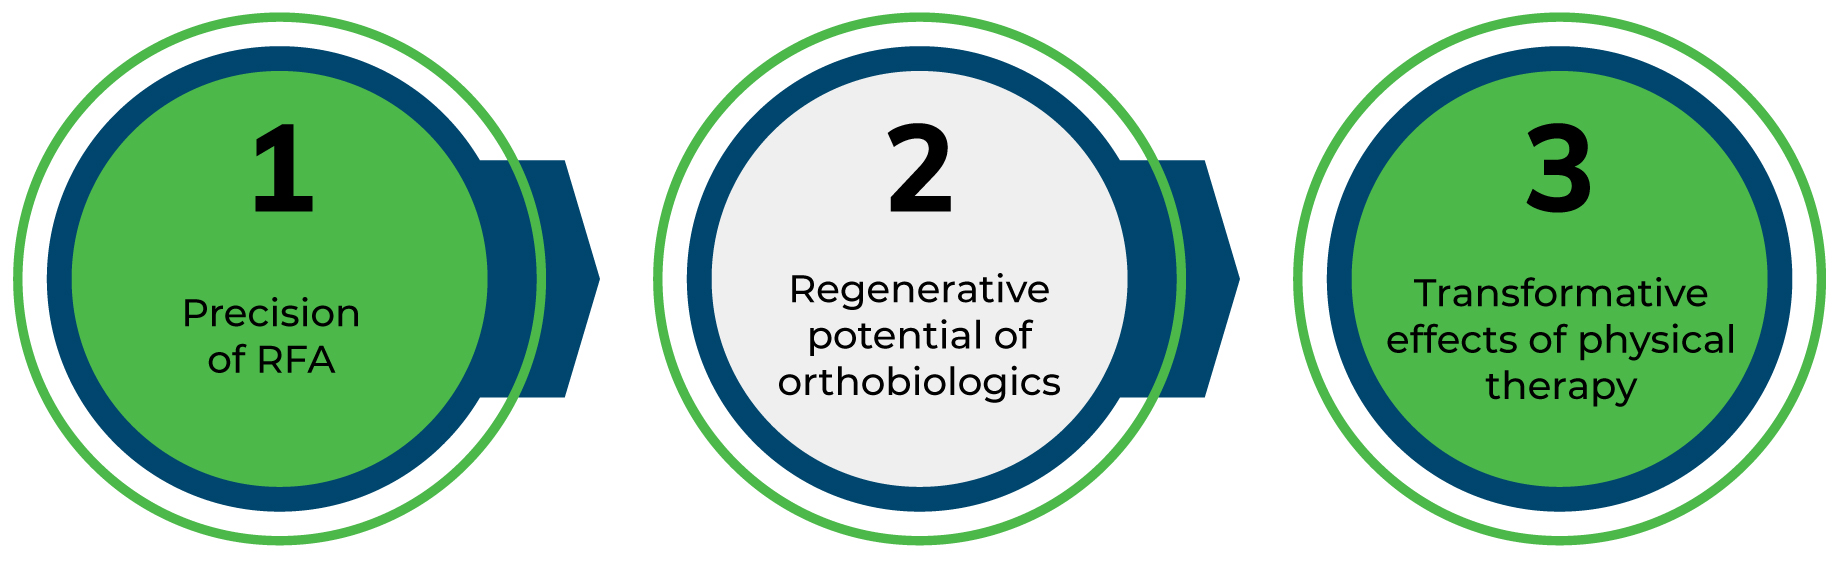 Precision of RFA- Regenerative potential of orthobiologics-Transformative effects of physical therapy